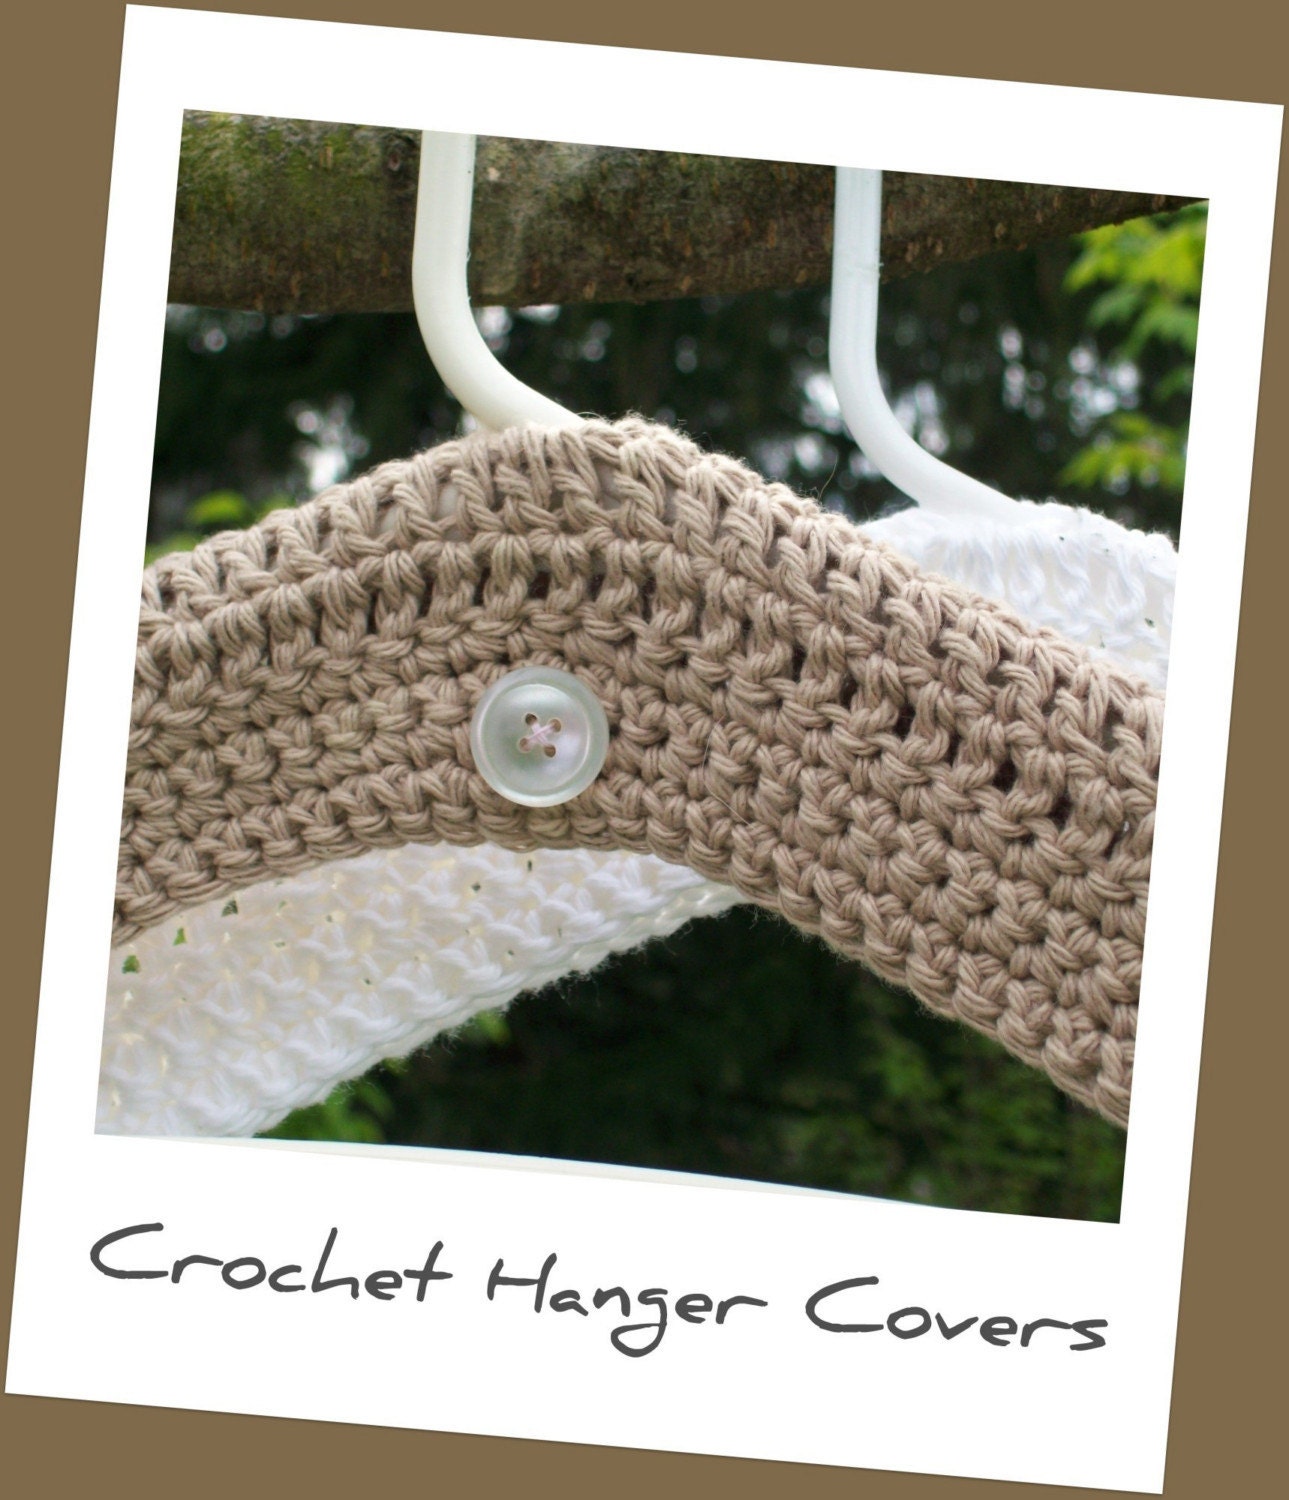 How to Crochet Hanger Covers | eHow.com